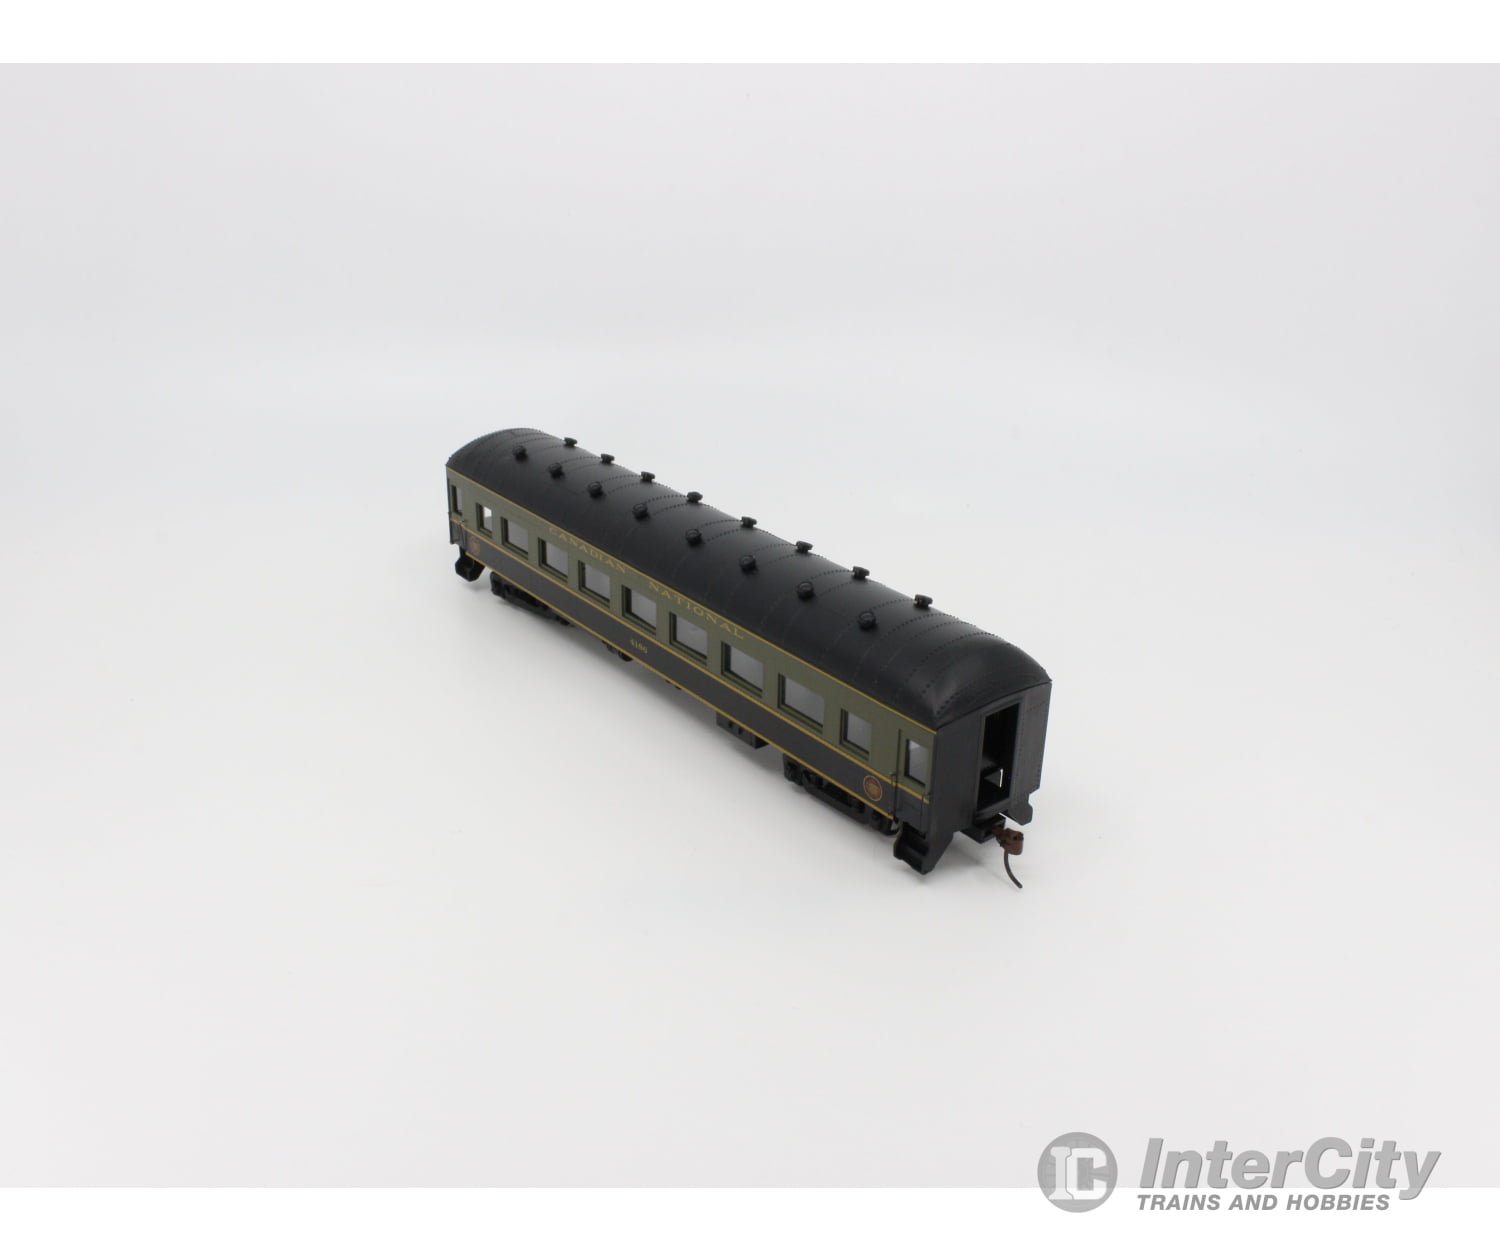 Roundhouse 86585 Ho Arch-Roof Coach Passenger Car Canadian National (Cn) 4186 Cars